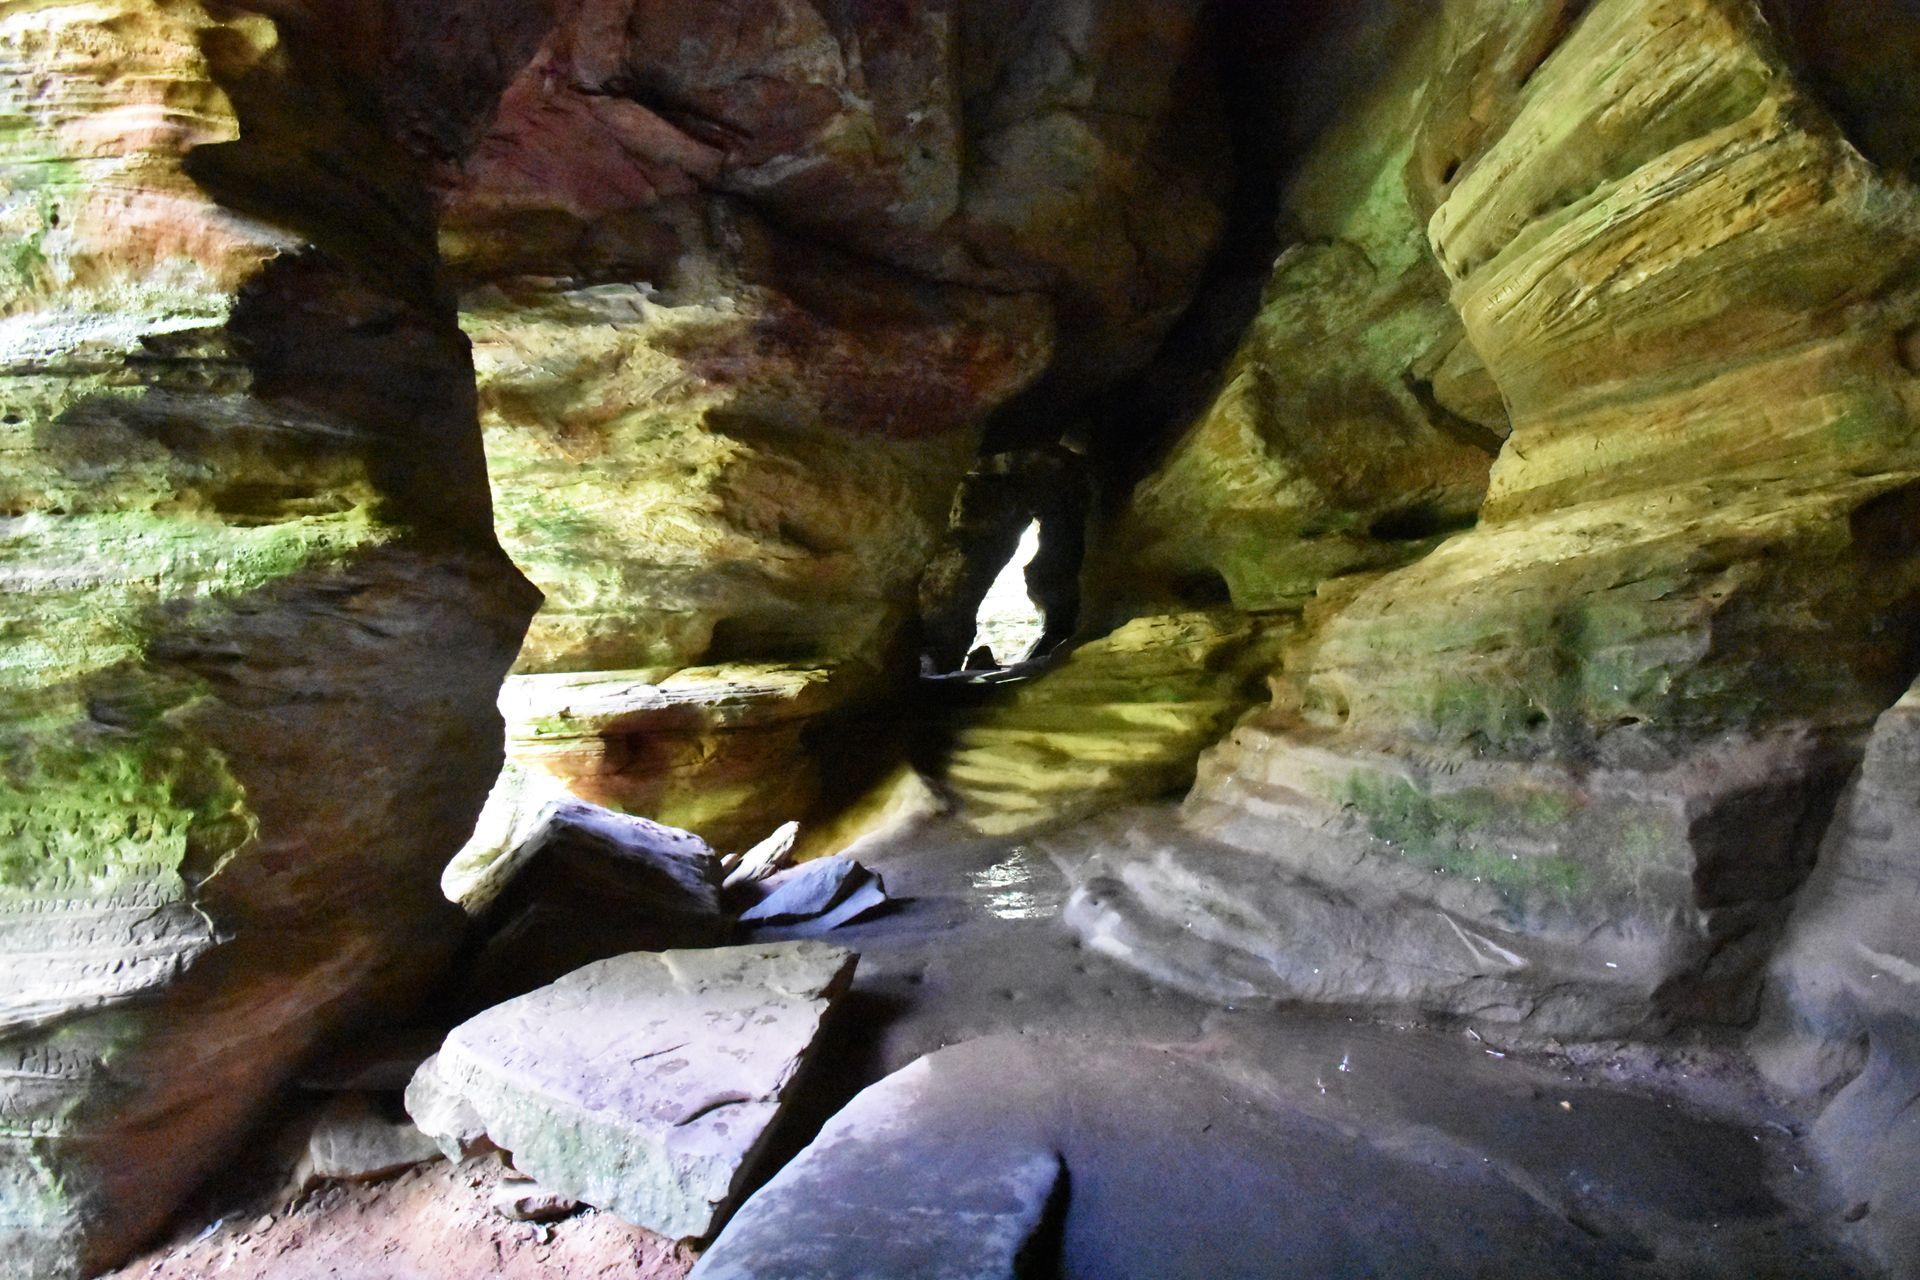 Looking into Rock House, a large cave area with a few separate openings.